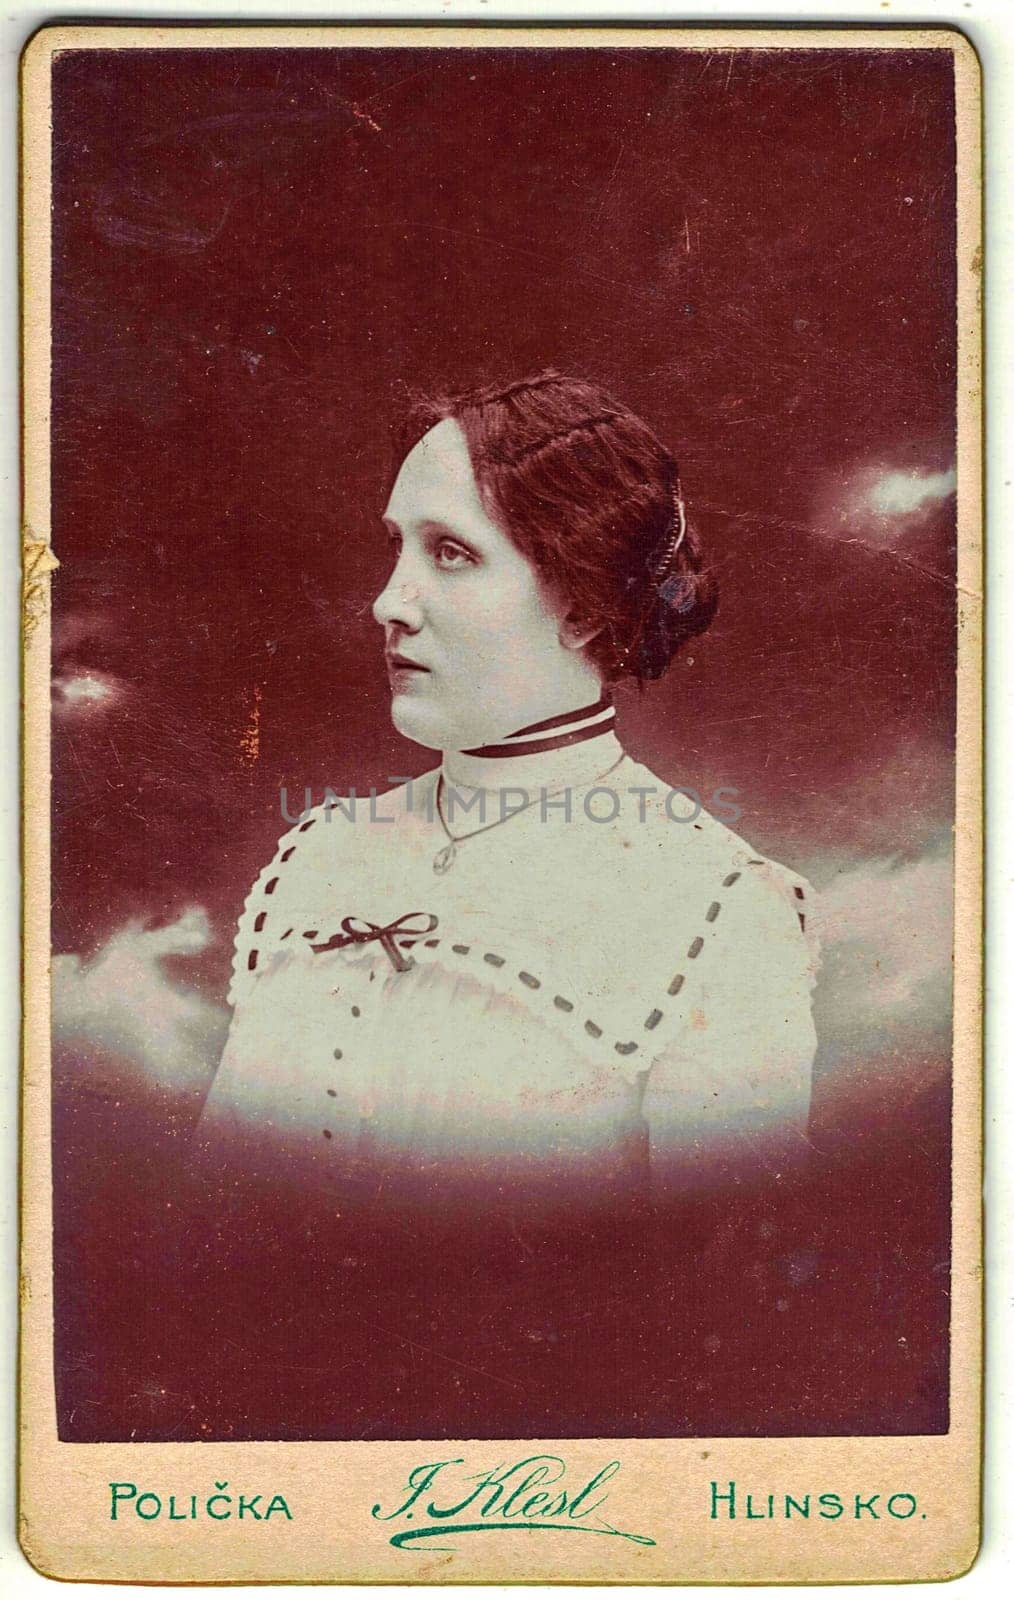 POLICKA, CZECHOSLOVAKIA - CIRCA 1920: Vintage cabinet card shows portrait of the middle-aged woman. Photo was taken in a photo studio.